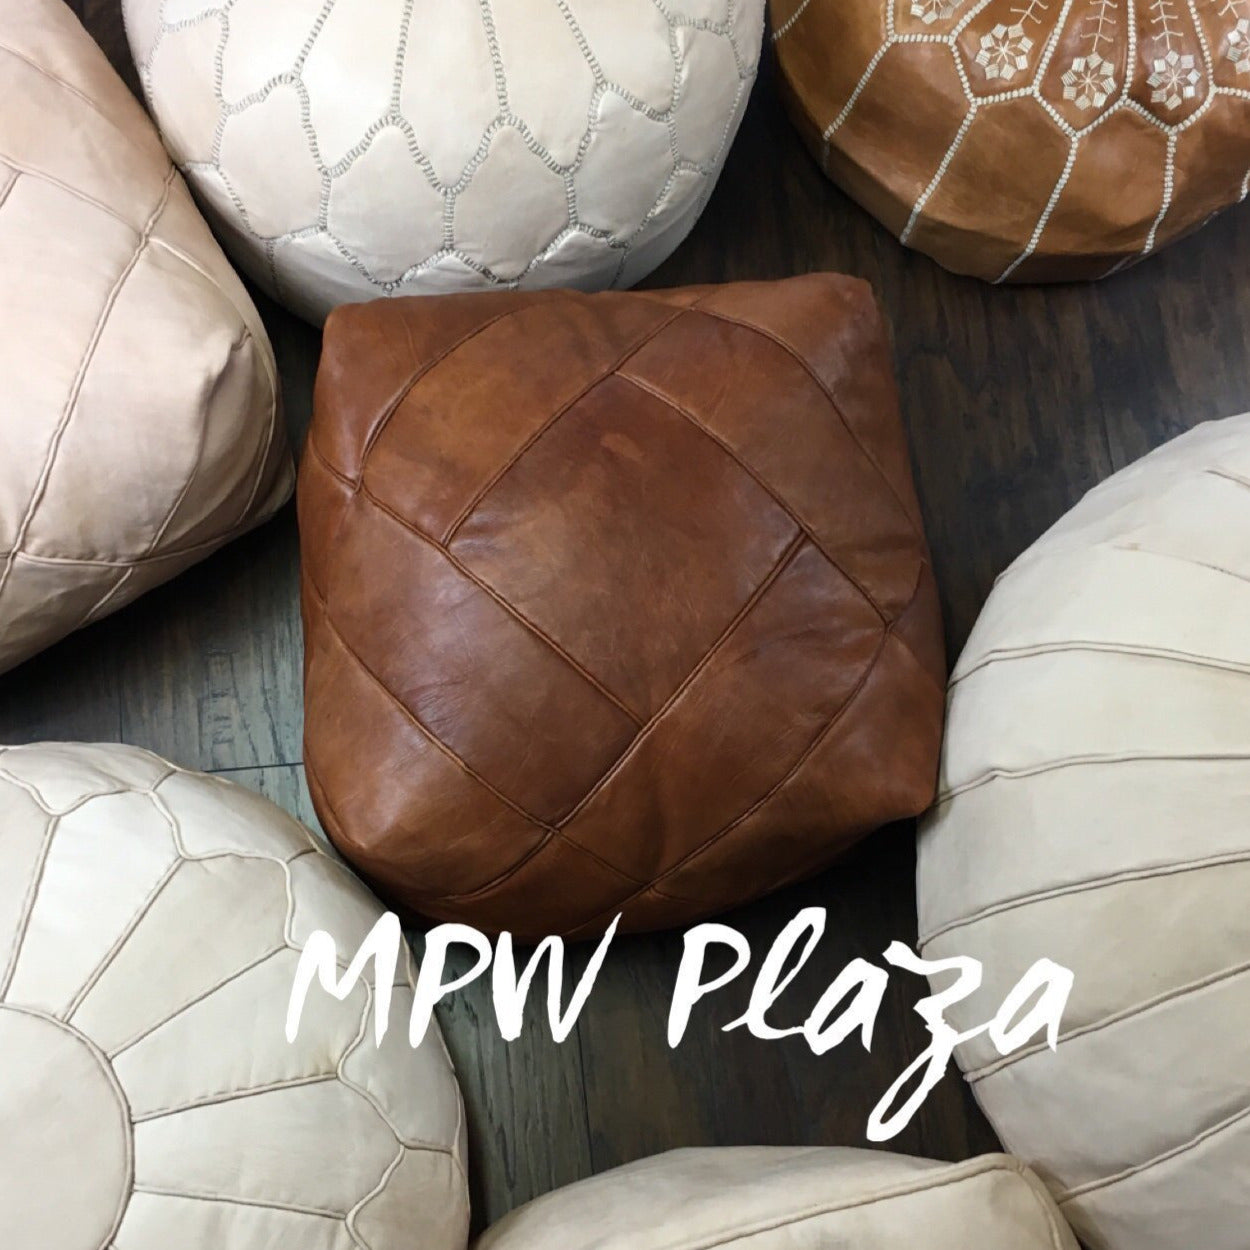 MPW Plaza® ZigZag Moroccan Pouf, Brown tone, Square 16" x 26" crafted by hand, Premium Moroccan Leather, Limited edition exclusive, couture ottoman (Cover) freeshipping - MPW Plaza®